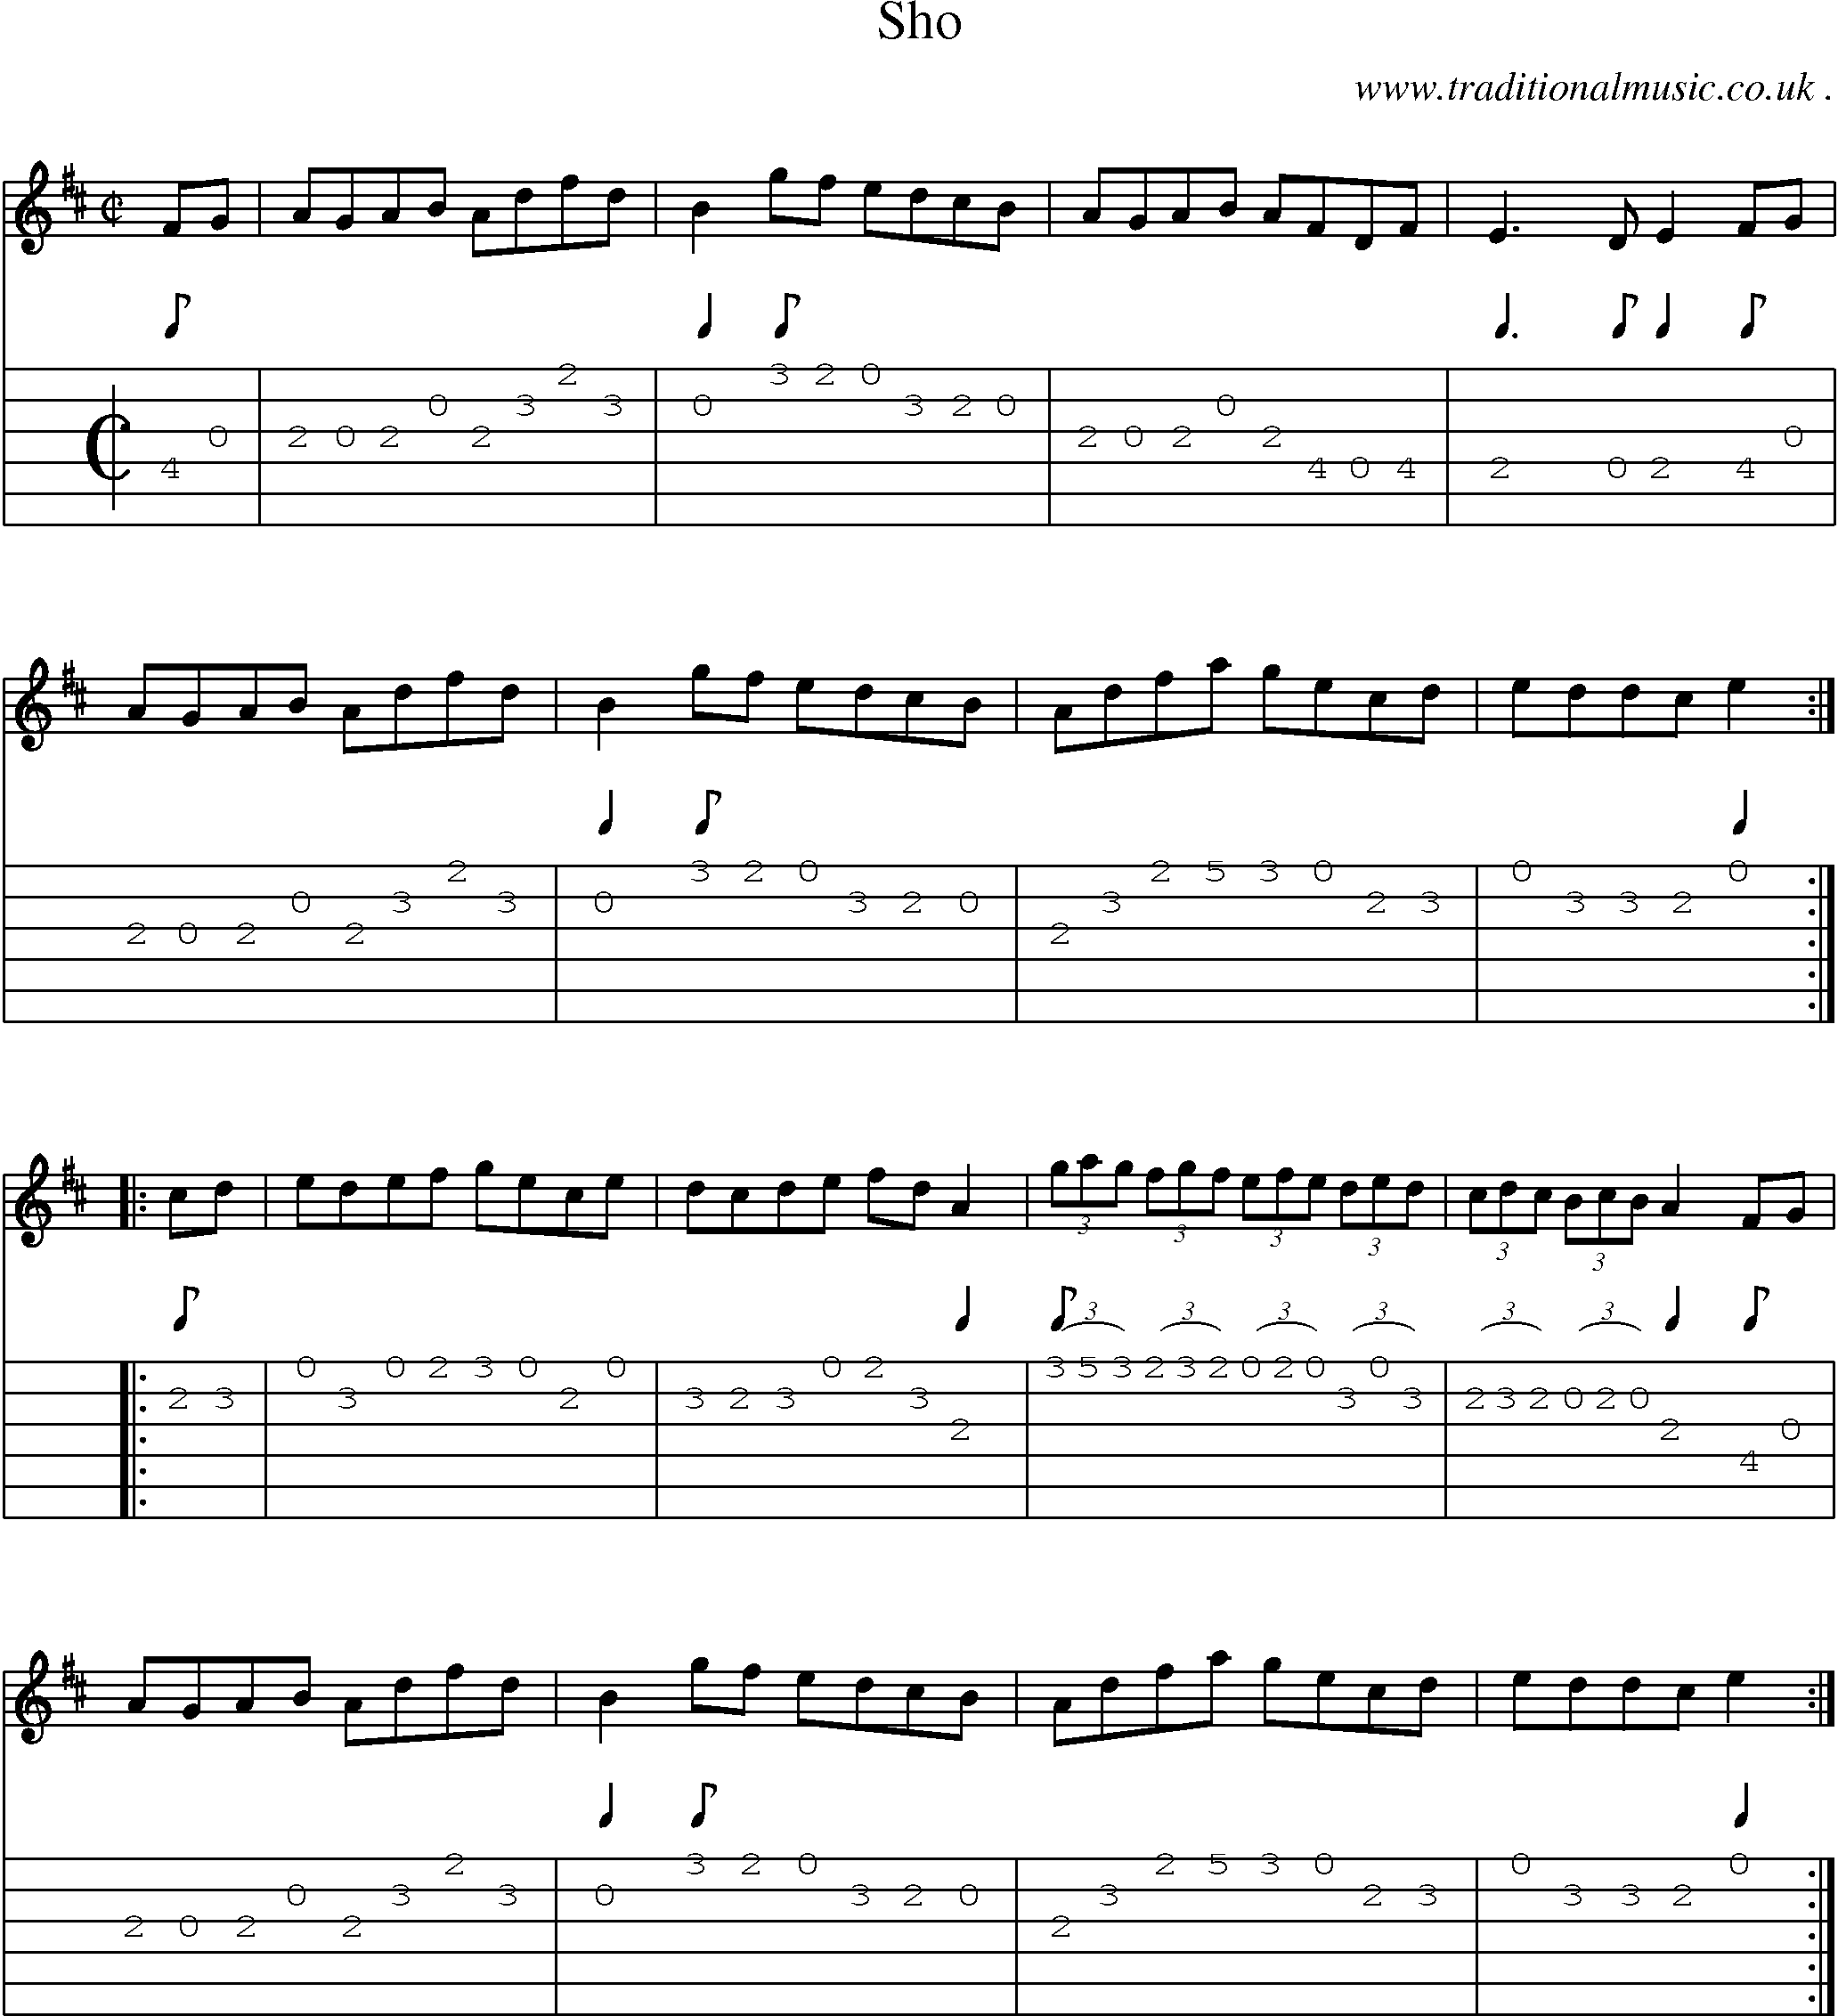 Sheet-Music and Guitar Tabs for Sho